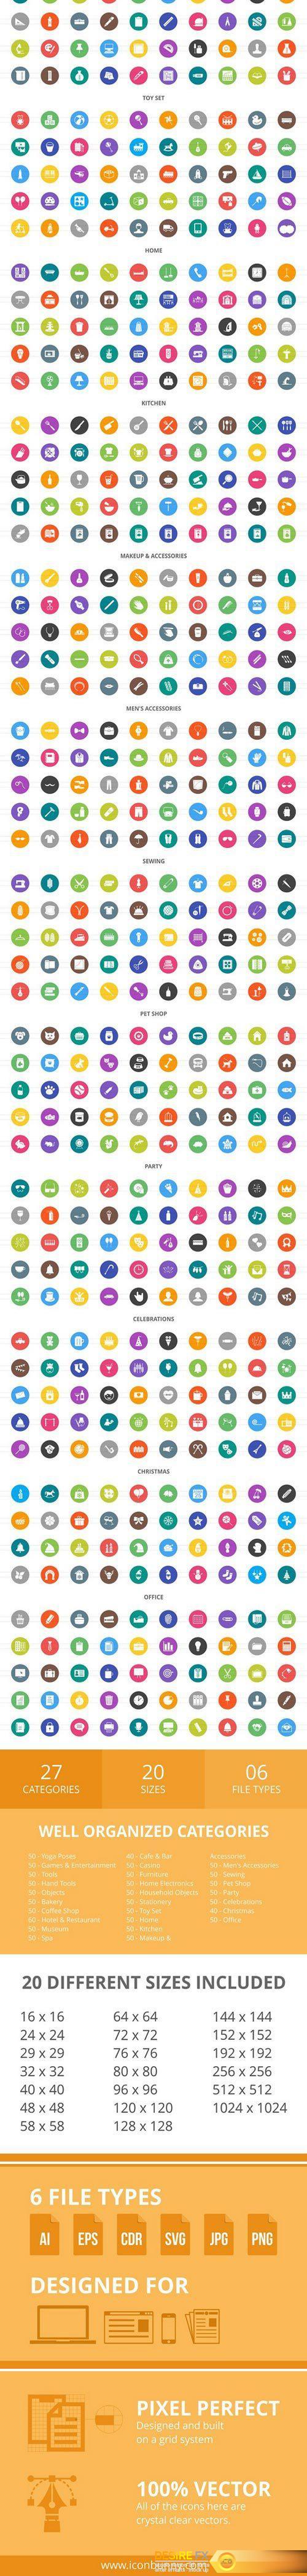 CM - 1340 Indoors Filled Round Icons 2428207